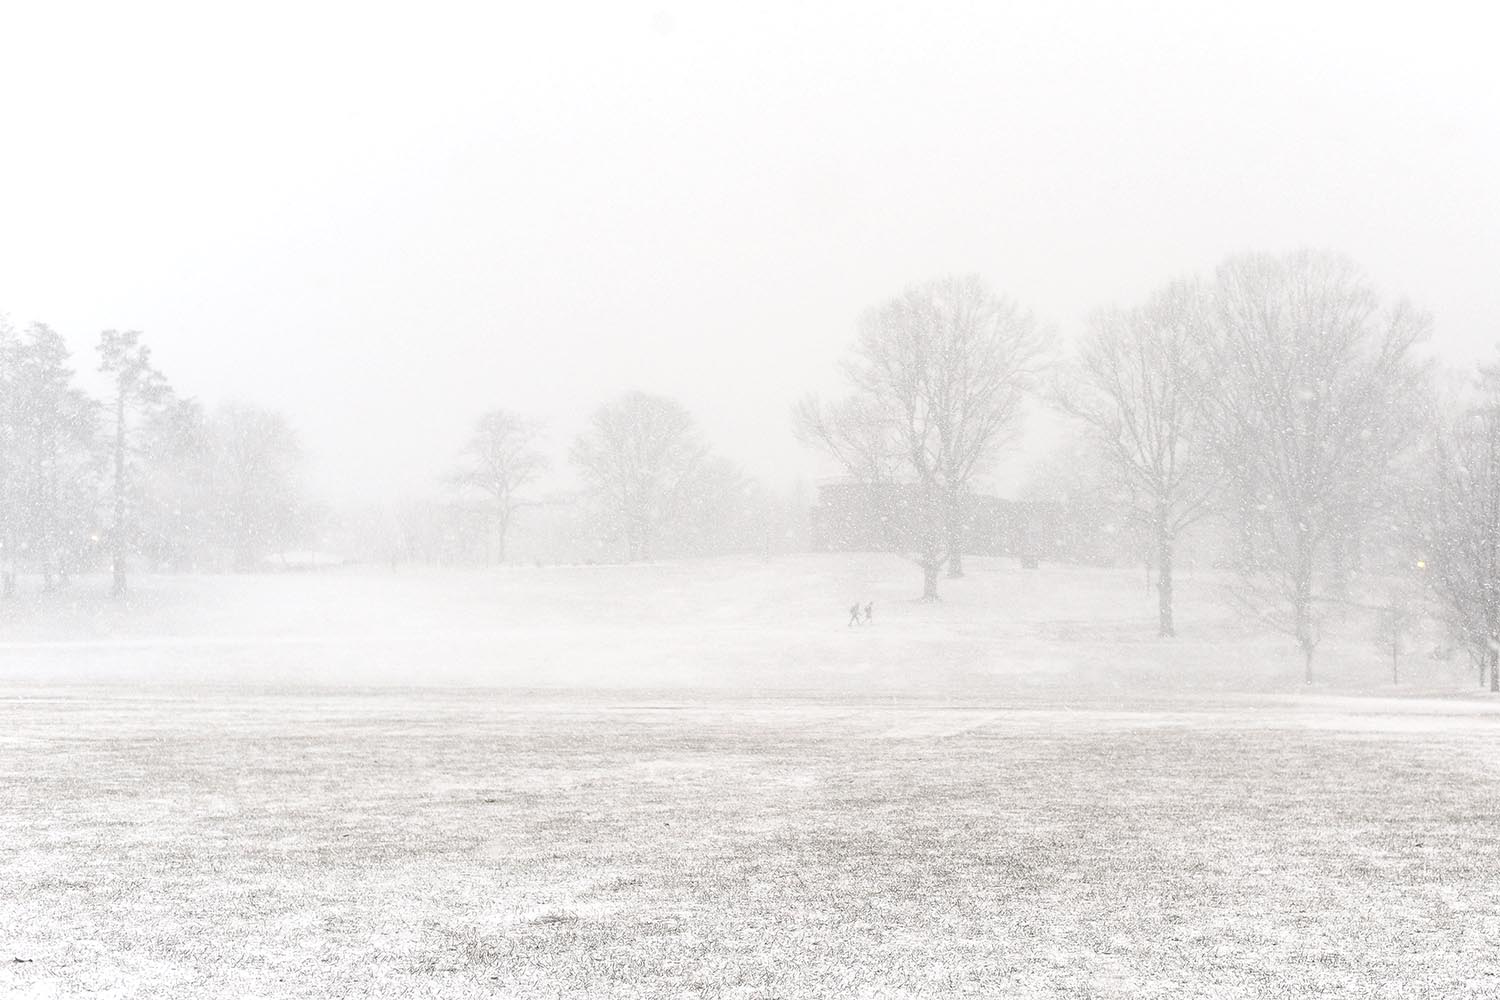 A snow squall stormed through Connecticut On Jan. 30, forming nearly white-out conditions on Wesleyan's campus. Temps plummeted from 30 degrees at 4 p.m. to 5 degrees at midnight.